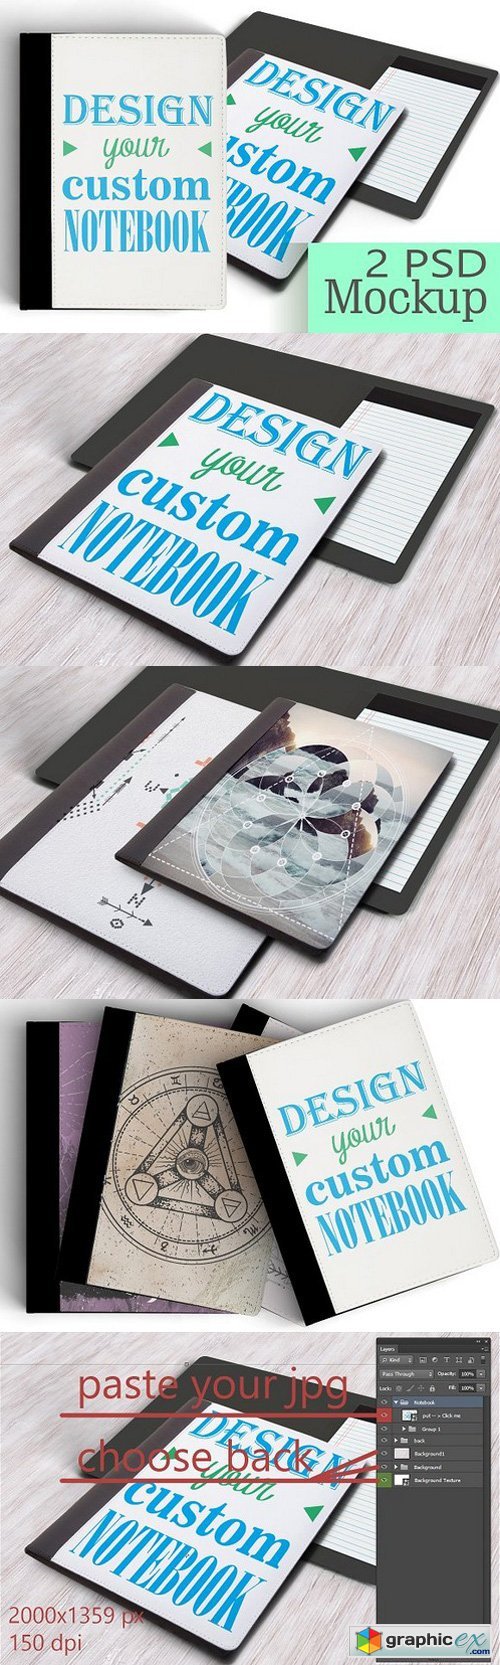 Personalized NoteBook Mockup/DIY